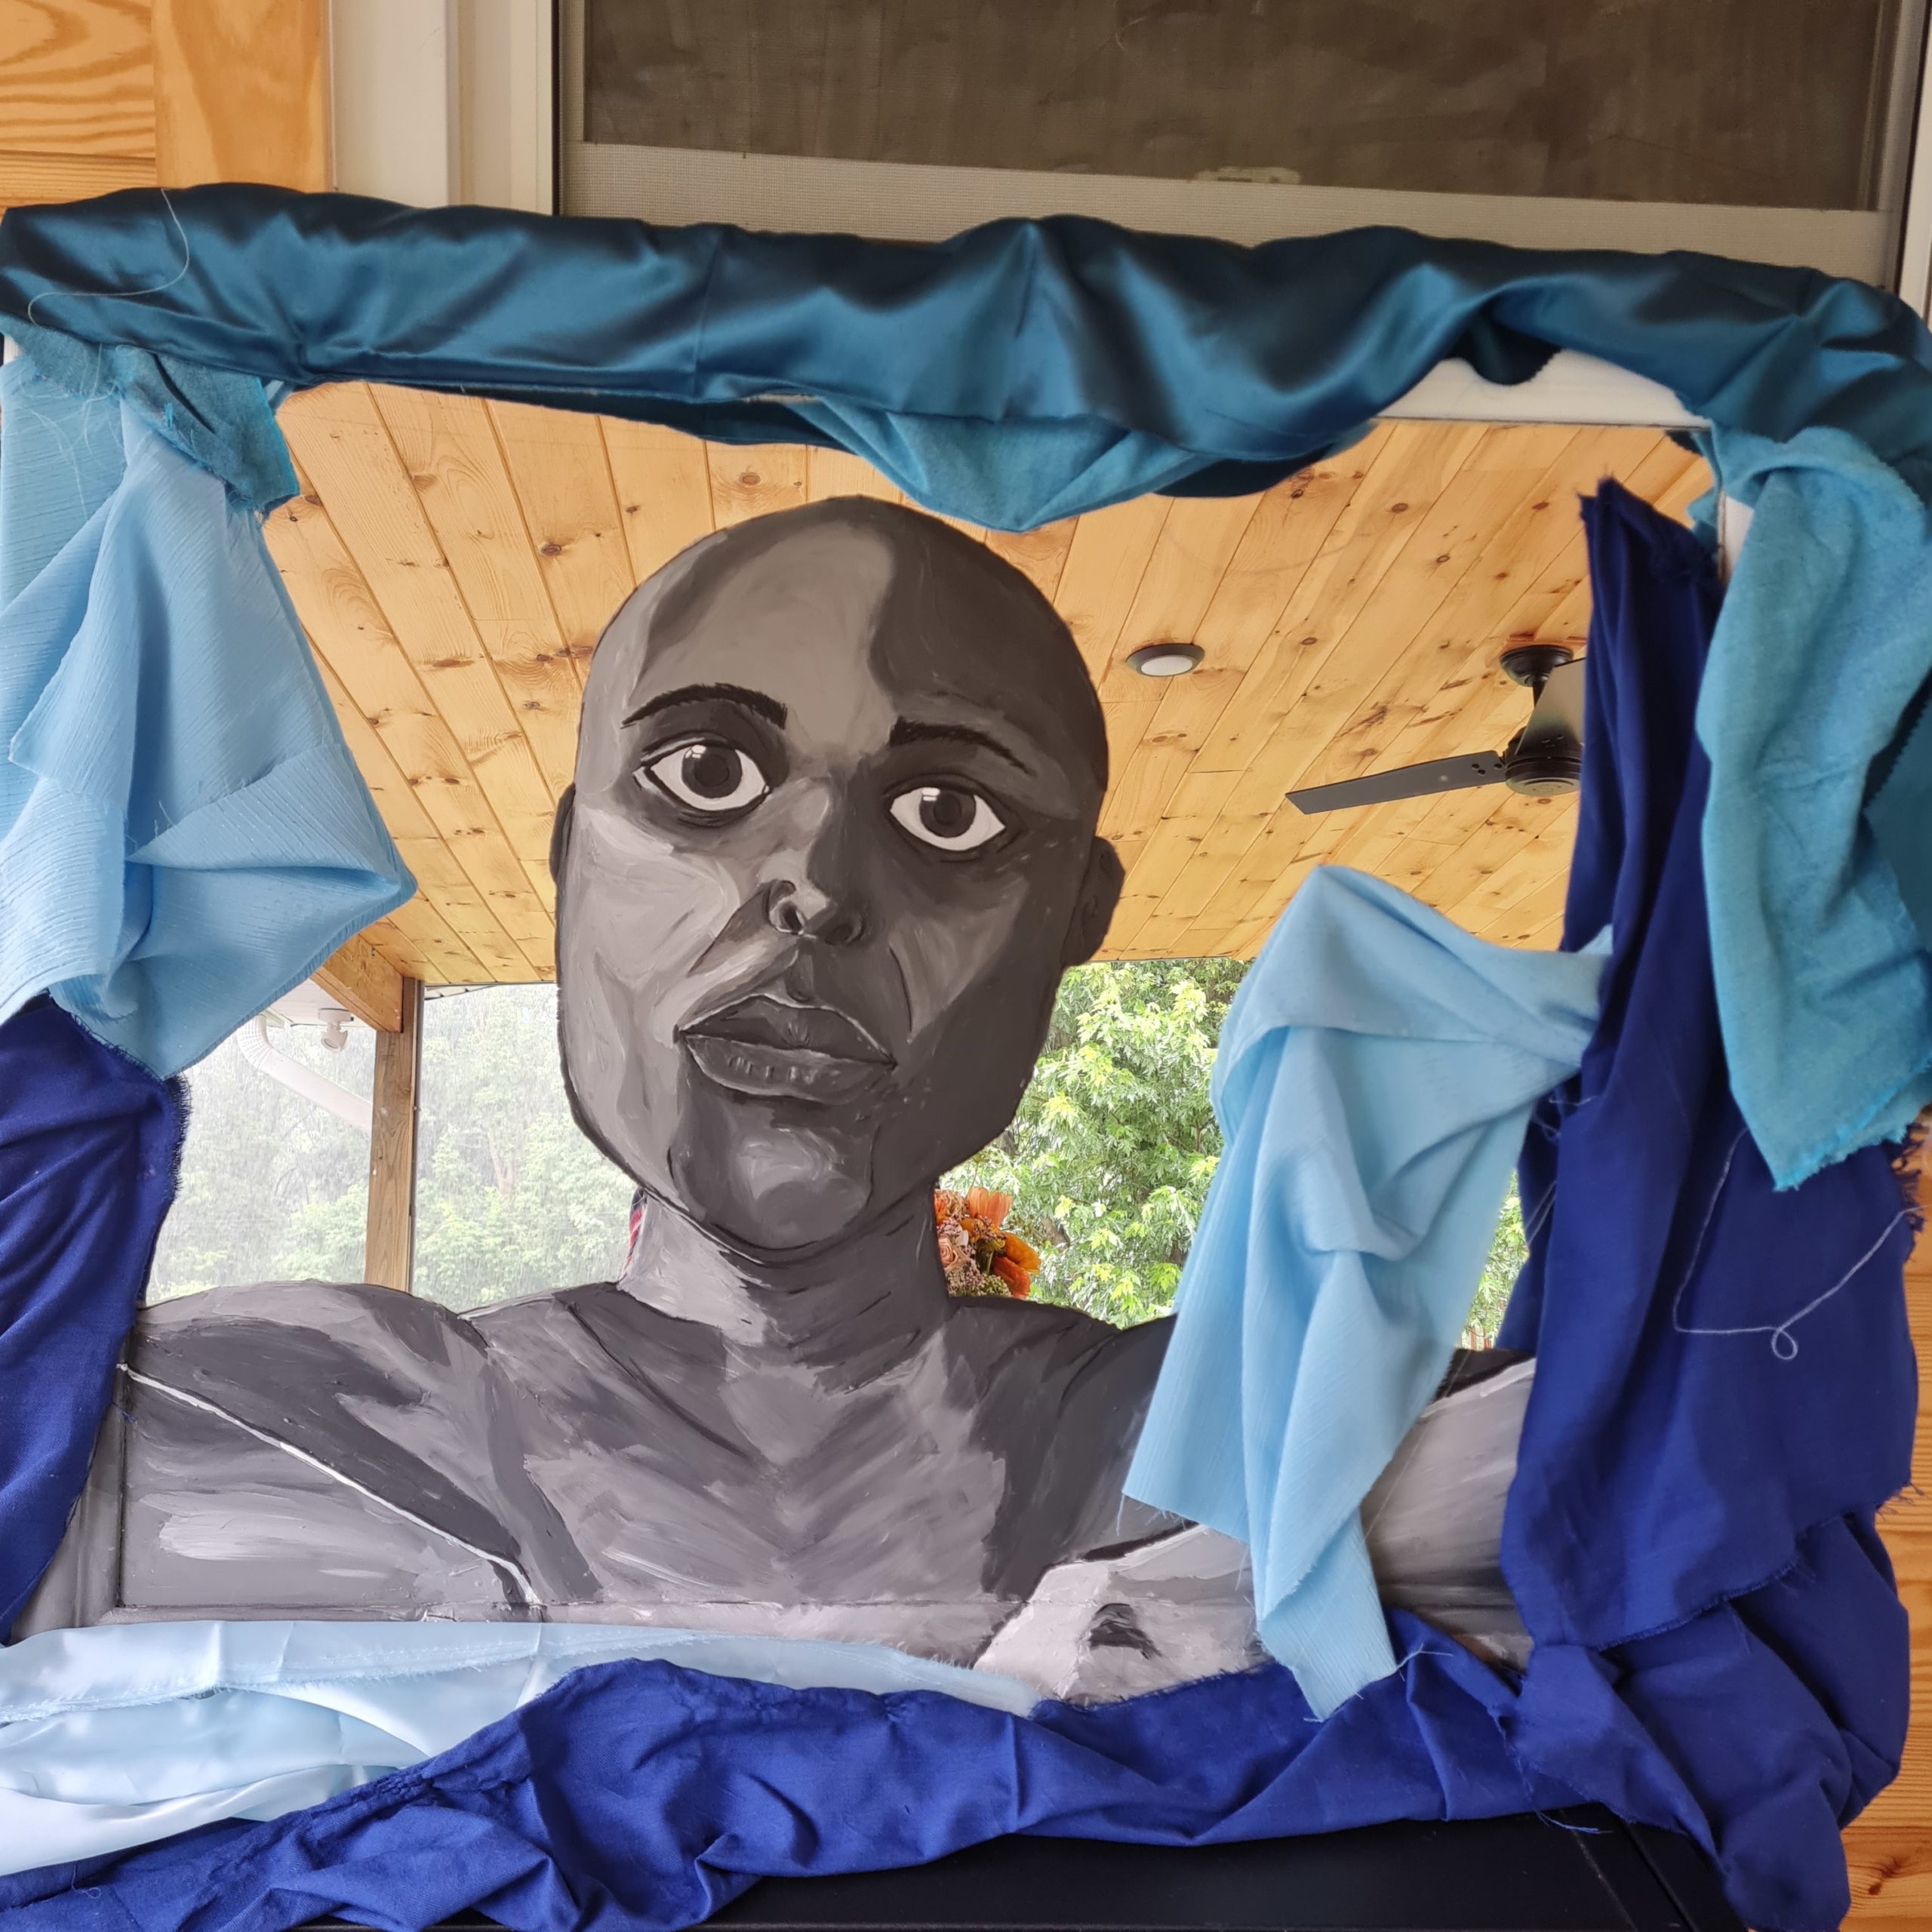 Mixed media painted self portrait of artist Karen Wangare Leonard. Painted on a mirror with fabric draped around the edges.